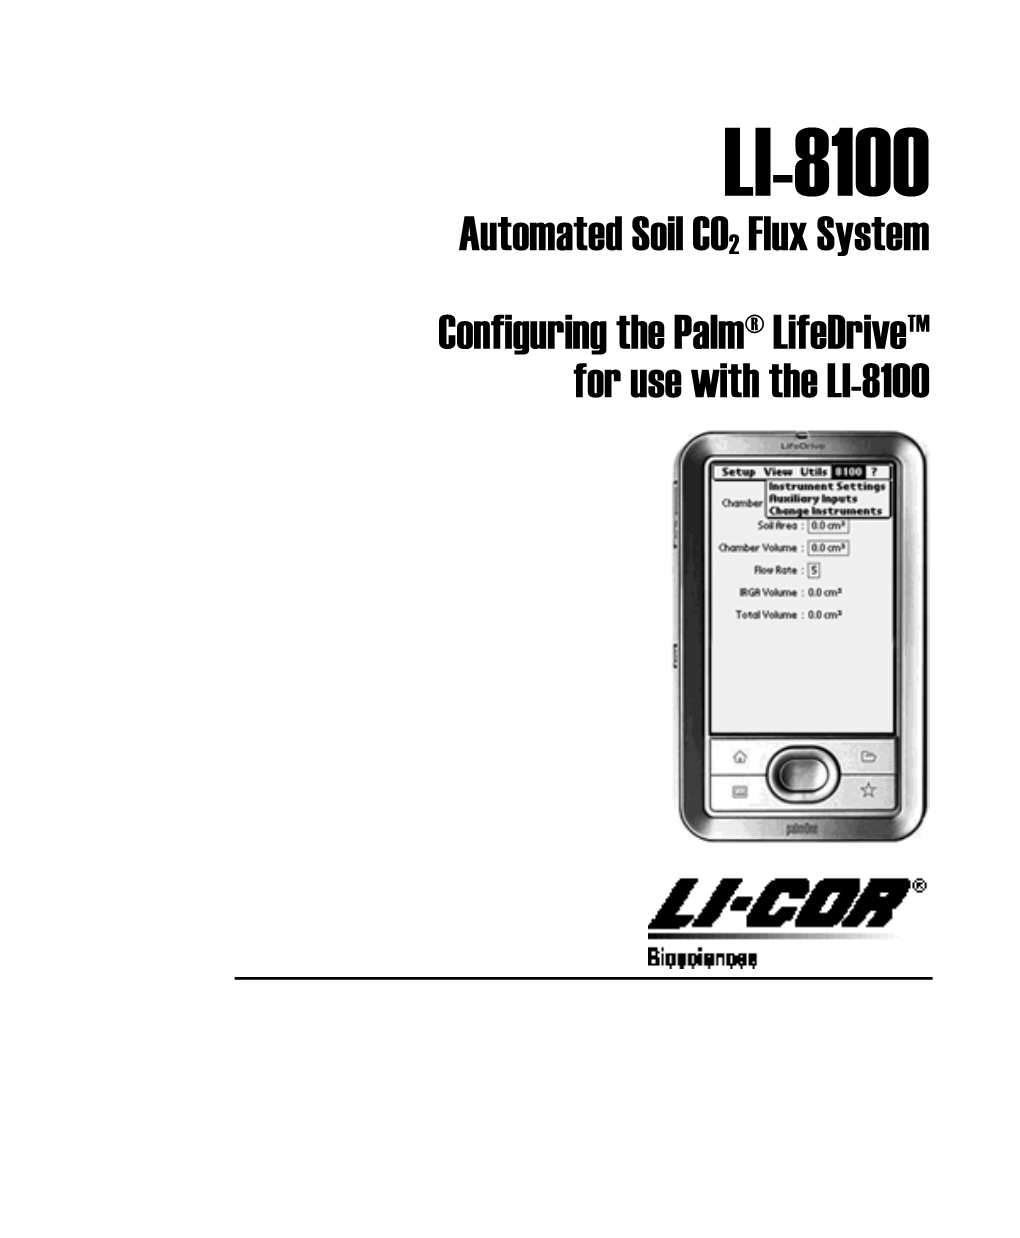 Configuring the Palm Lifedrive for Use with the LI-8100